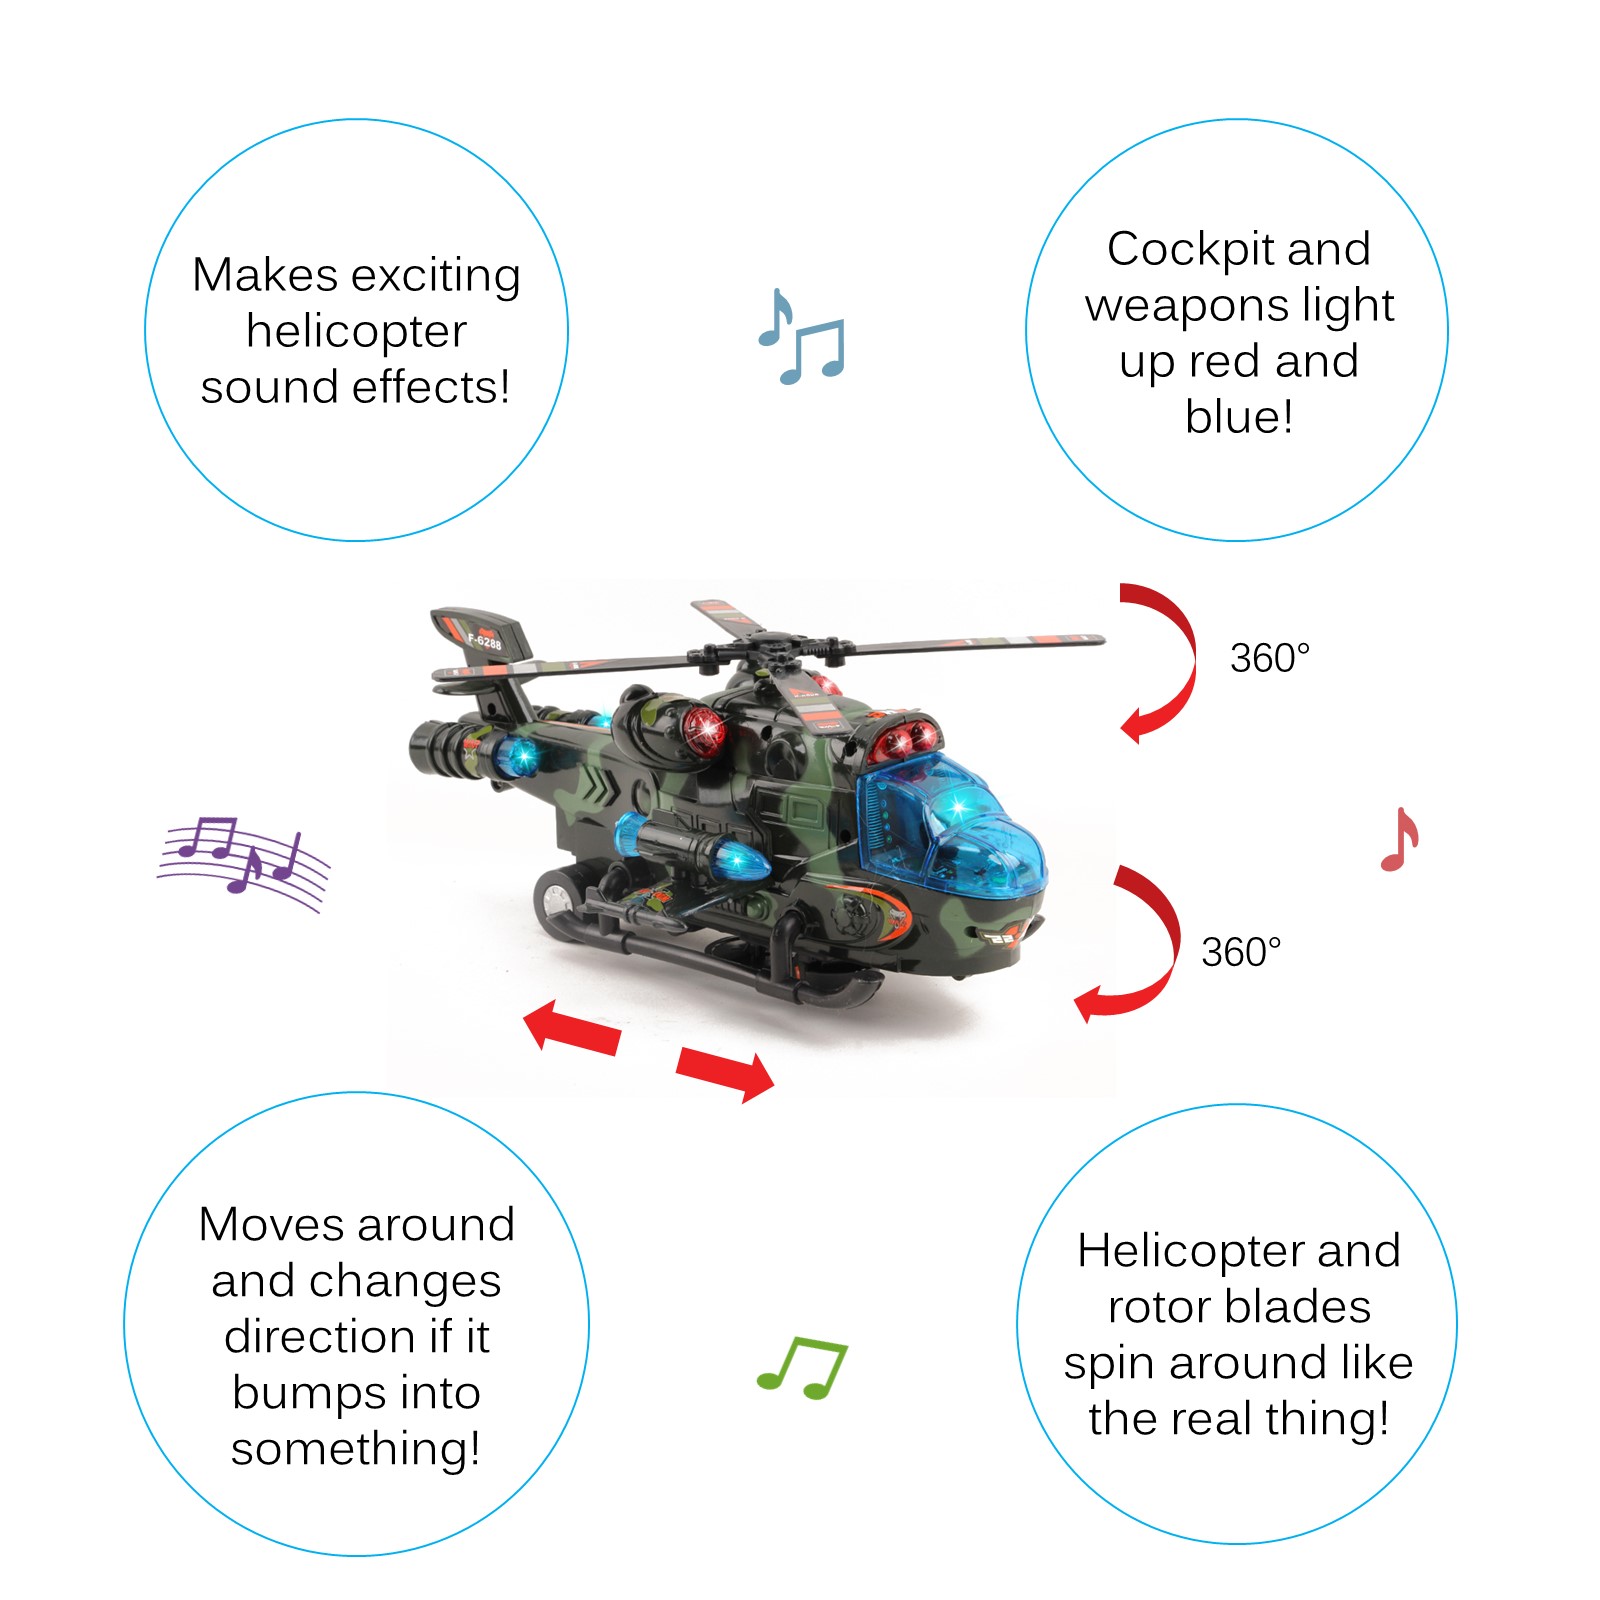 Vokodo Military Helicopter With Lights Sounds Bump And Go Self Riding Army Chopper Aircraft Toy Durable Battery Operated Kids Action Airplane Pretend Play Great Gift For Children Boys Girls Toddlers TD-16